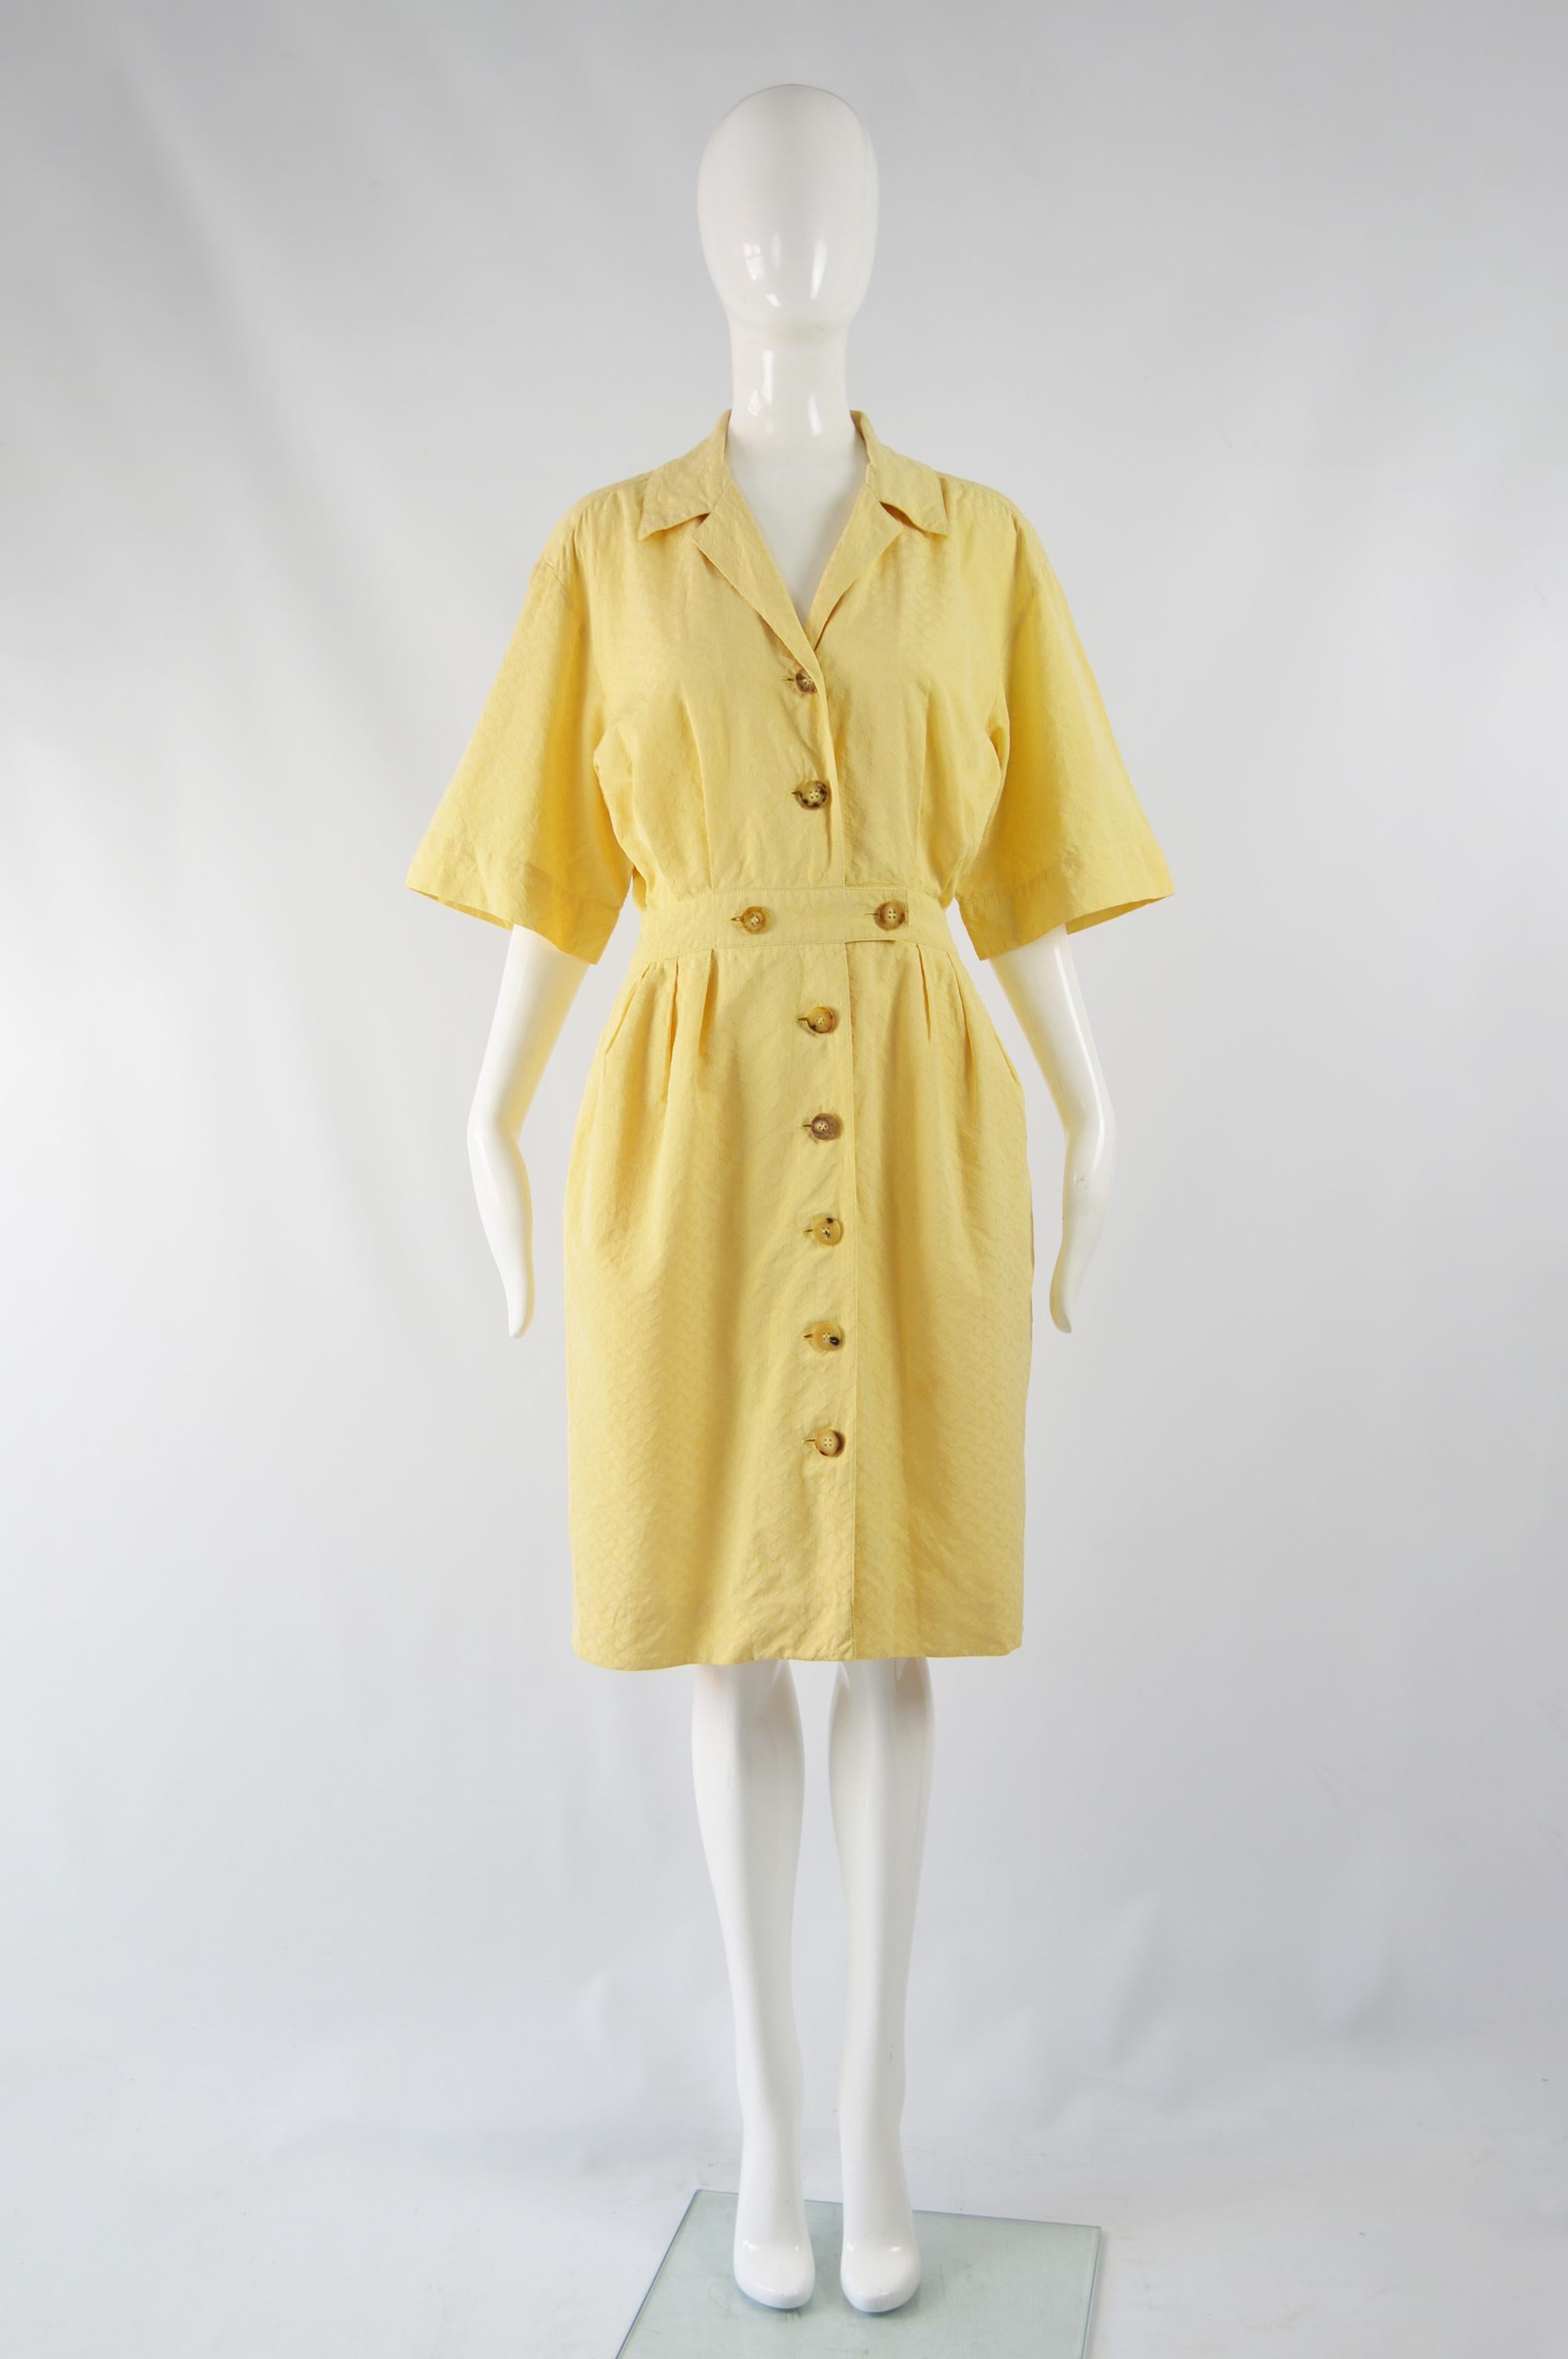 A fabulous vintage womens tea dress from the 80s by French luxury fashion house, Hermes. In a yellow textured cotton jacquard with wide, kimono inspired sleeves and a nipped waist that contrasts with the loose, blouson fit on top to create a